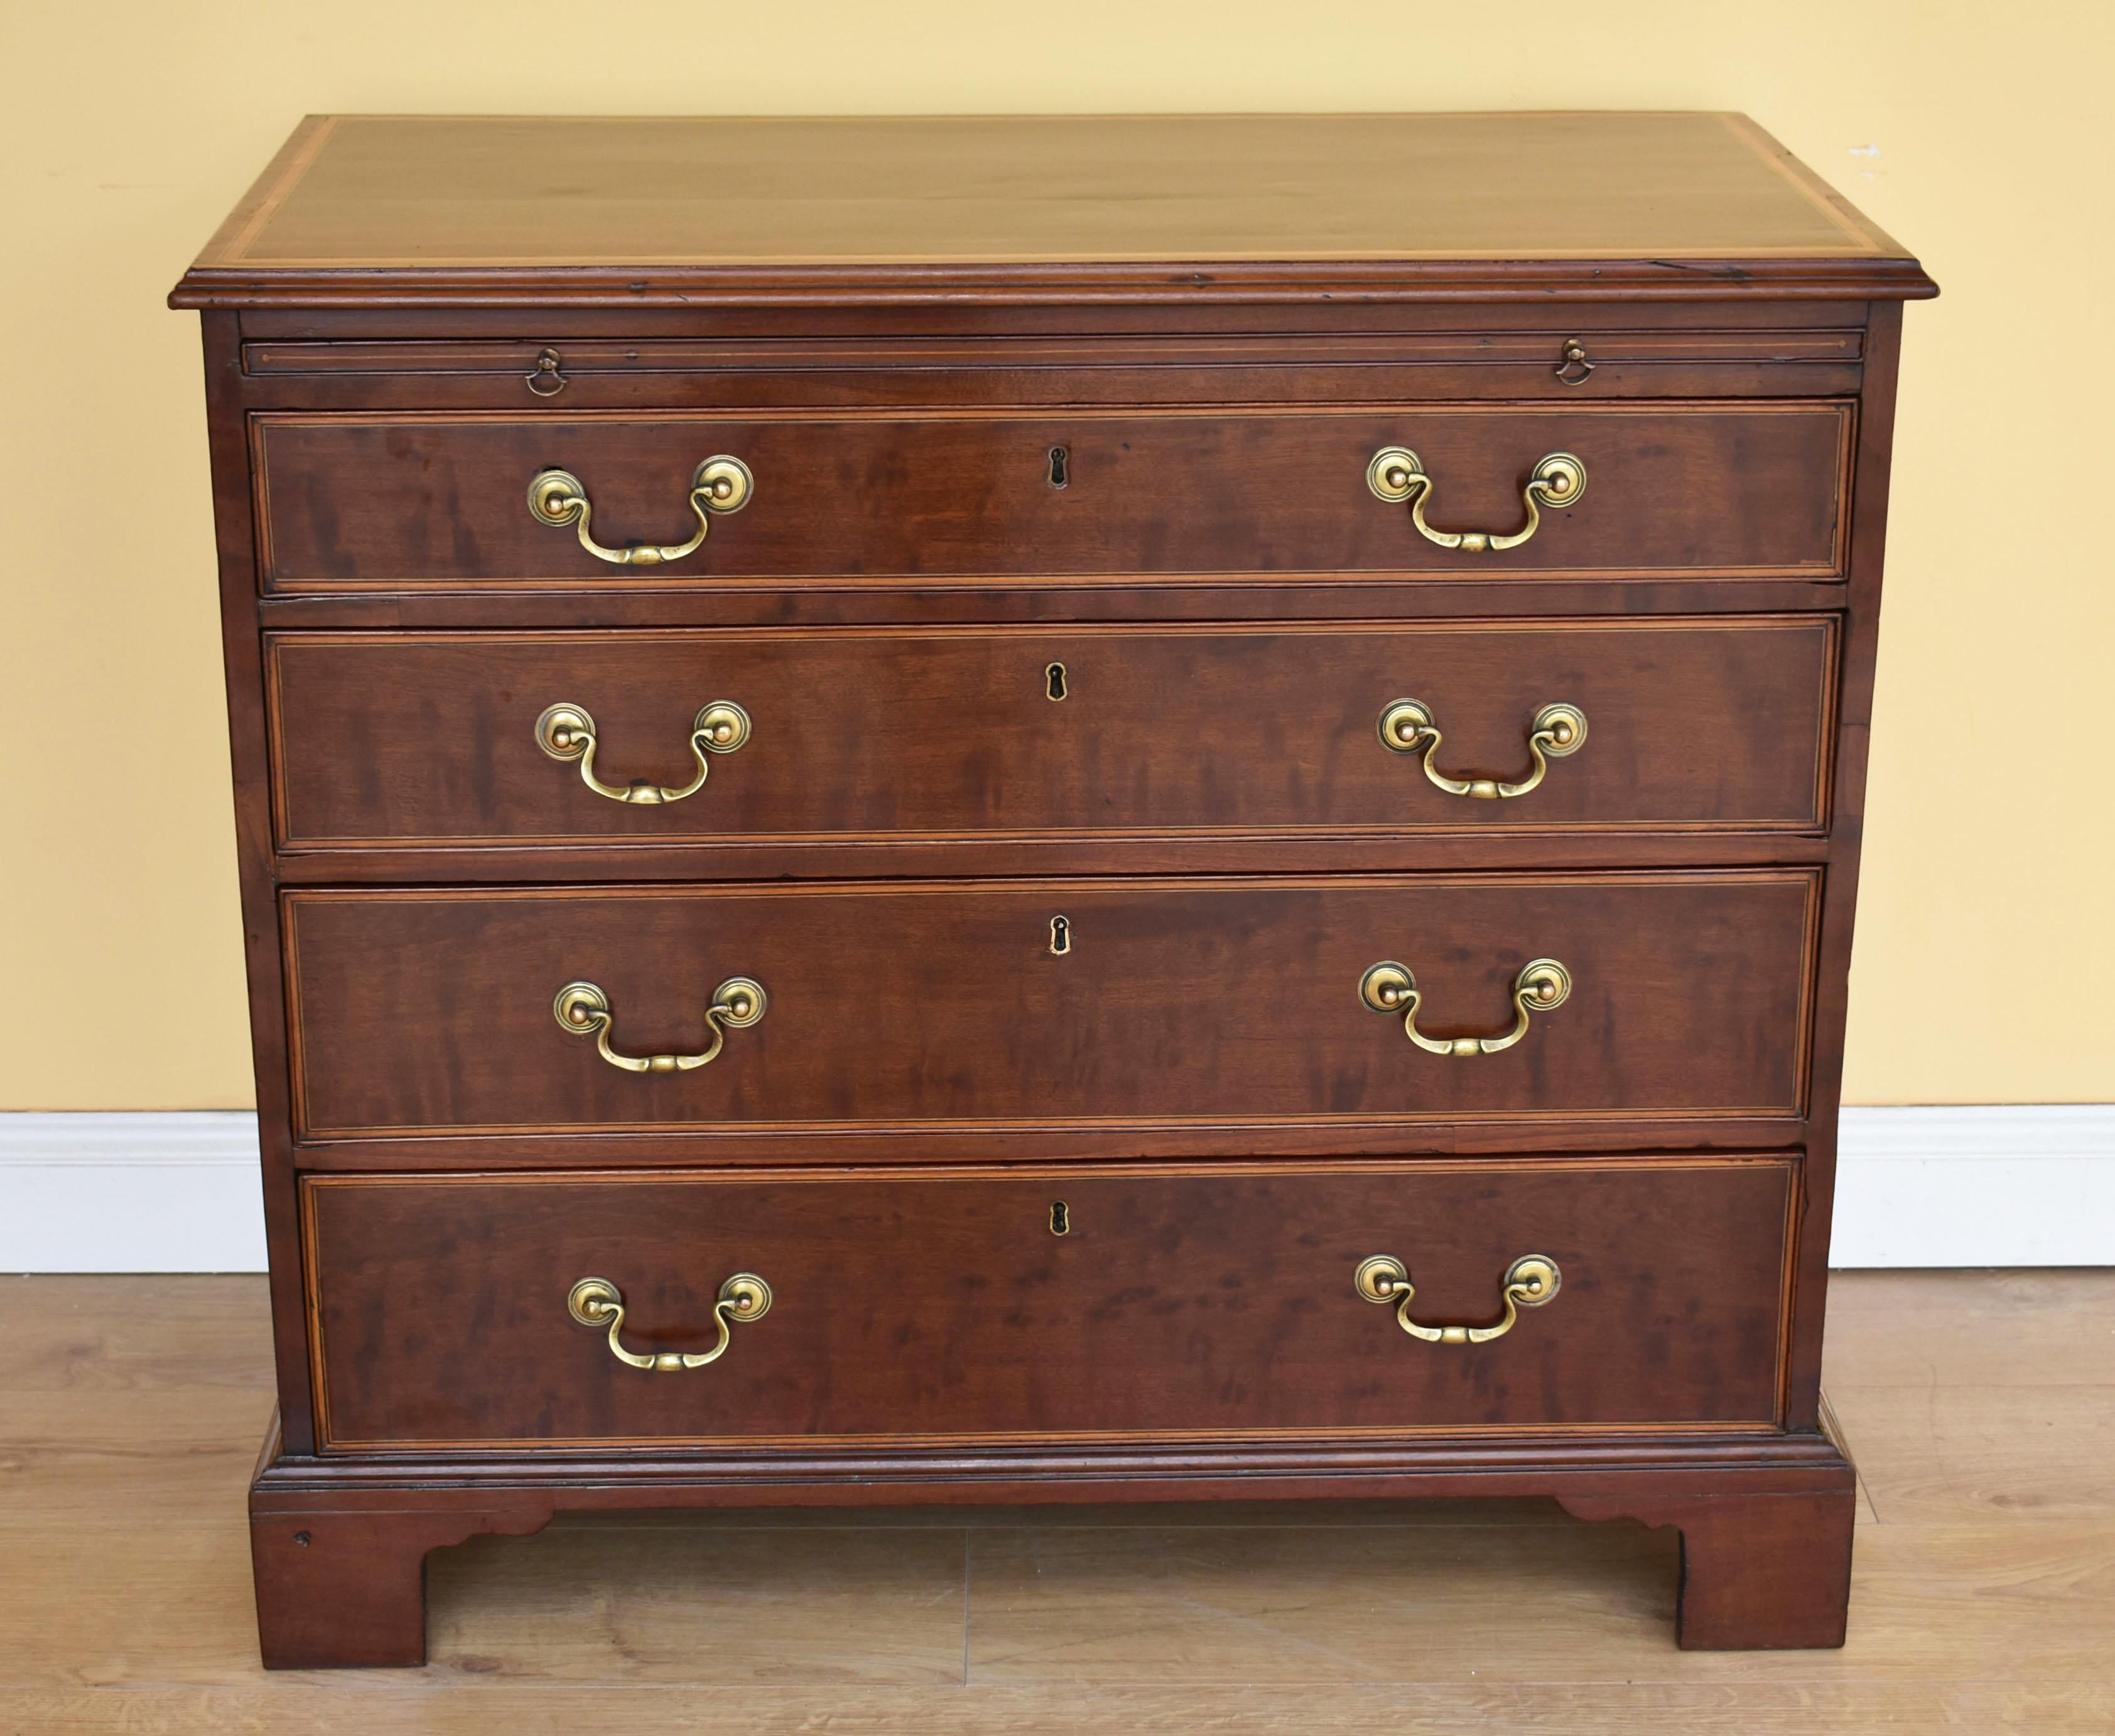 For sale is a good quality George III mahogany and later inlaid chest of drawers. The top of the chest has an inlaid edge above four graduated drawers, each with matching inlays and brass swan handles. Standing on bracket feet, this chest of drawers